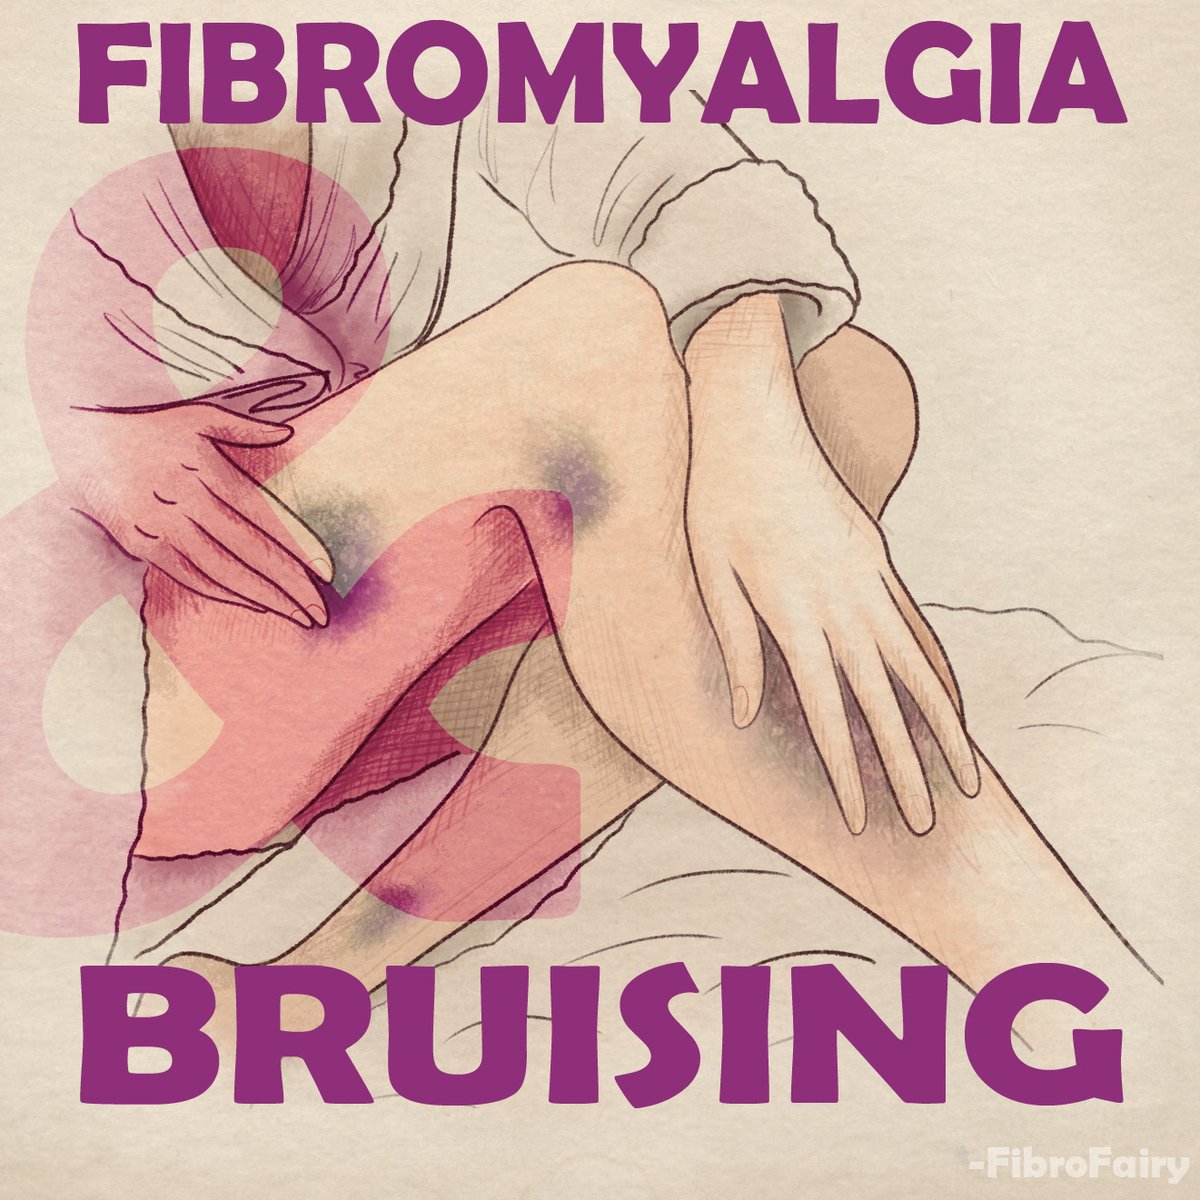 Did you know over 50% of us with #Fibromyalgia experience skin issues, like easy bruising?
It might be from unnoticed bumps due to #fibrofog or nutritional deficiencies, like low #VitaminC, which weakens blood vessels.
It's worth checking your values to rule out any issues!